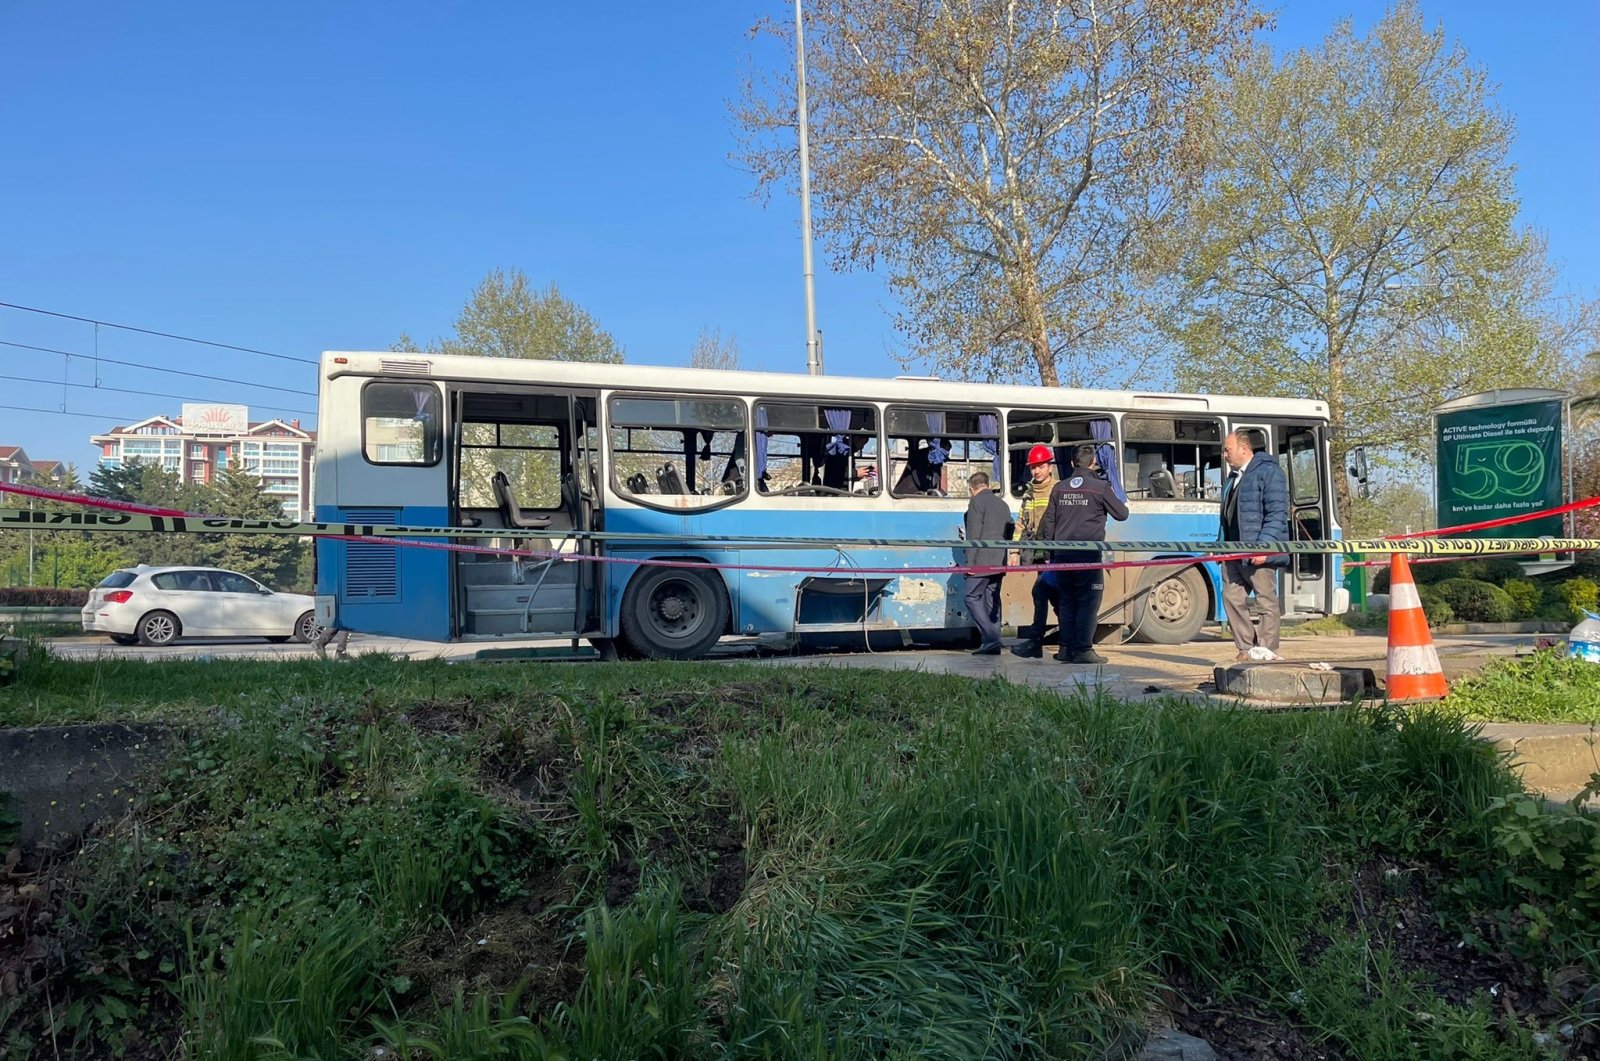 A view of the bus damaged in the attack, in Bursa, northwestern Turkey, April 20, 2022. (AA PHOTO)